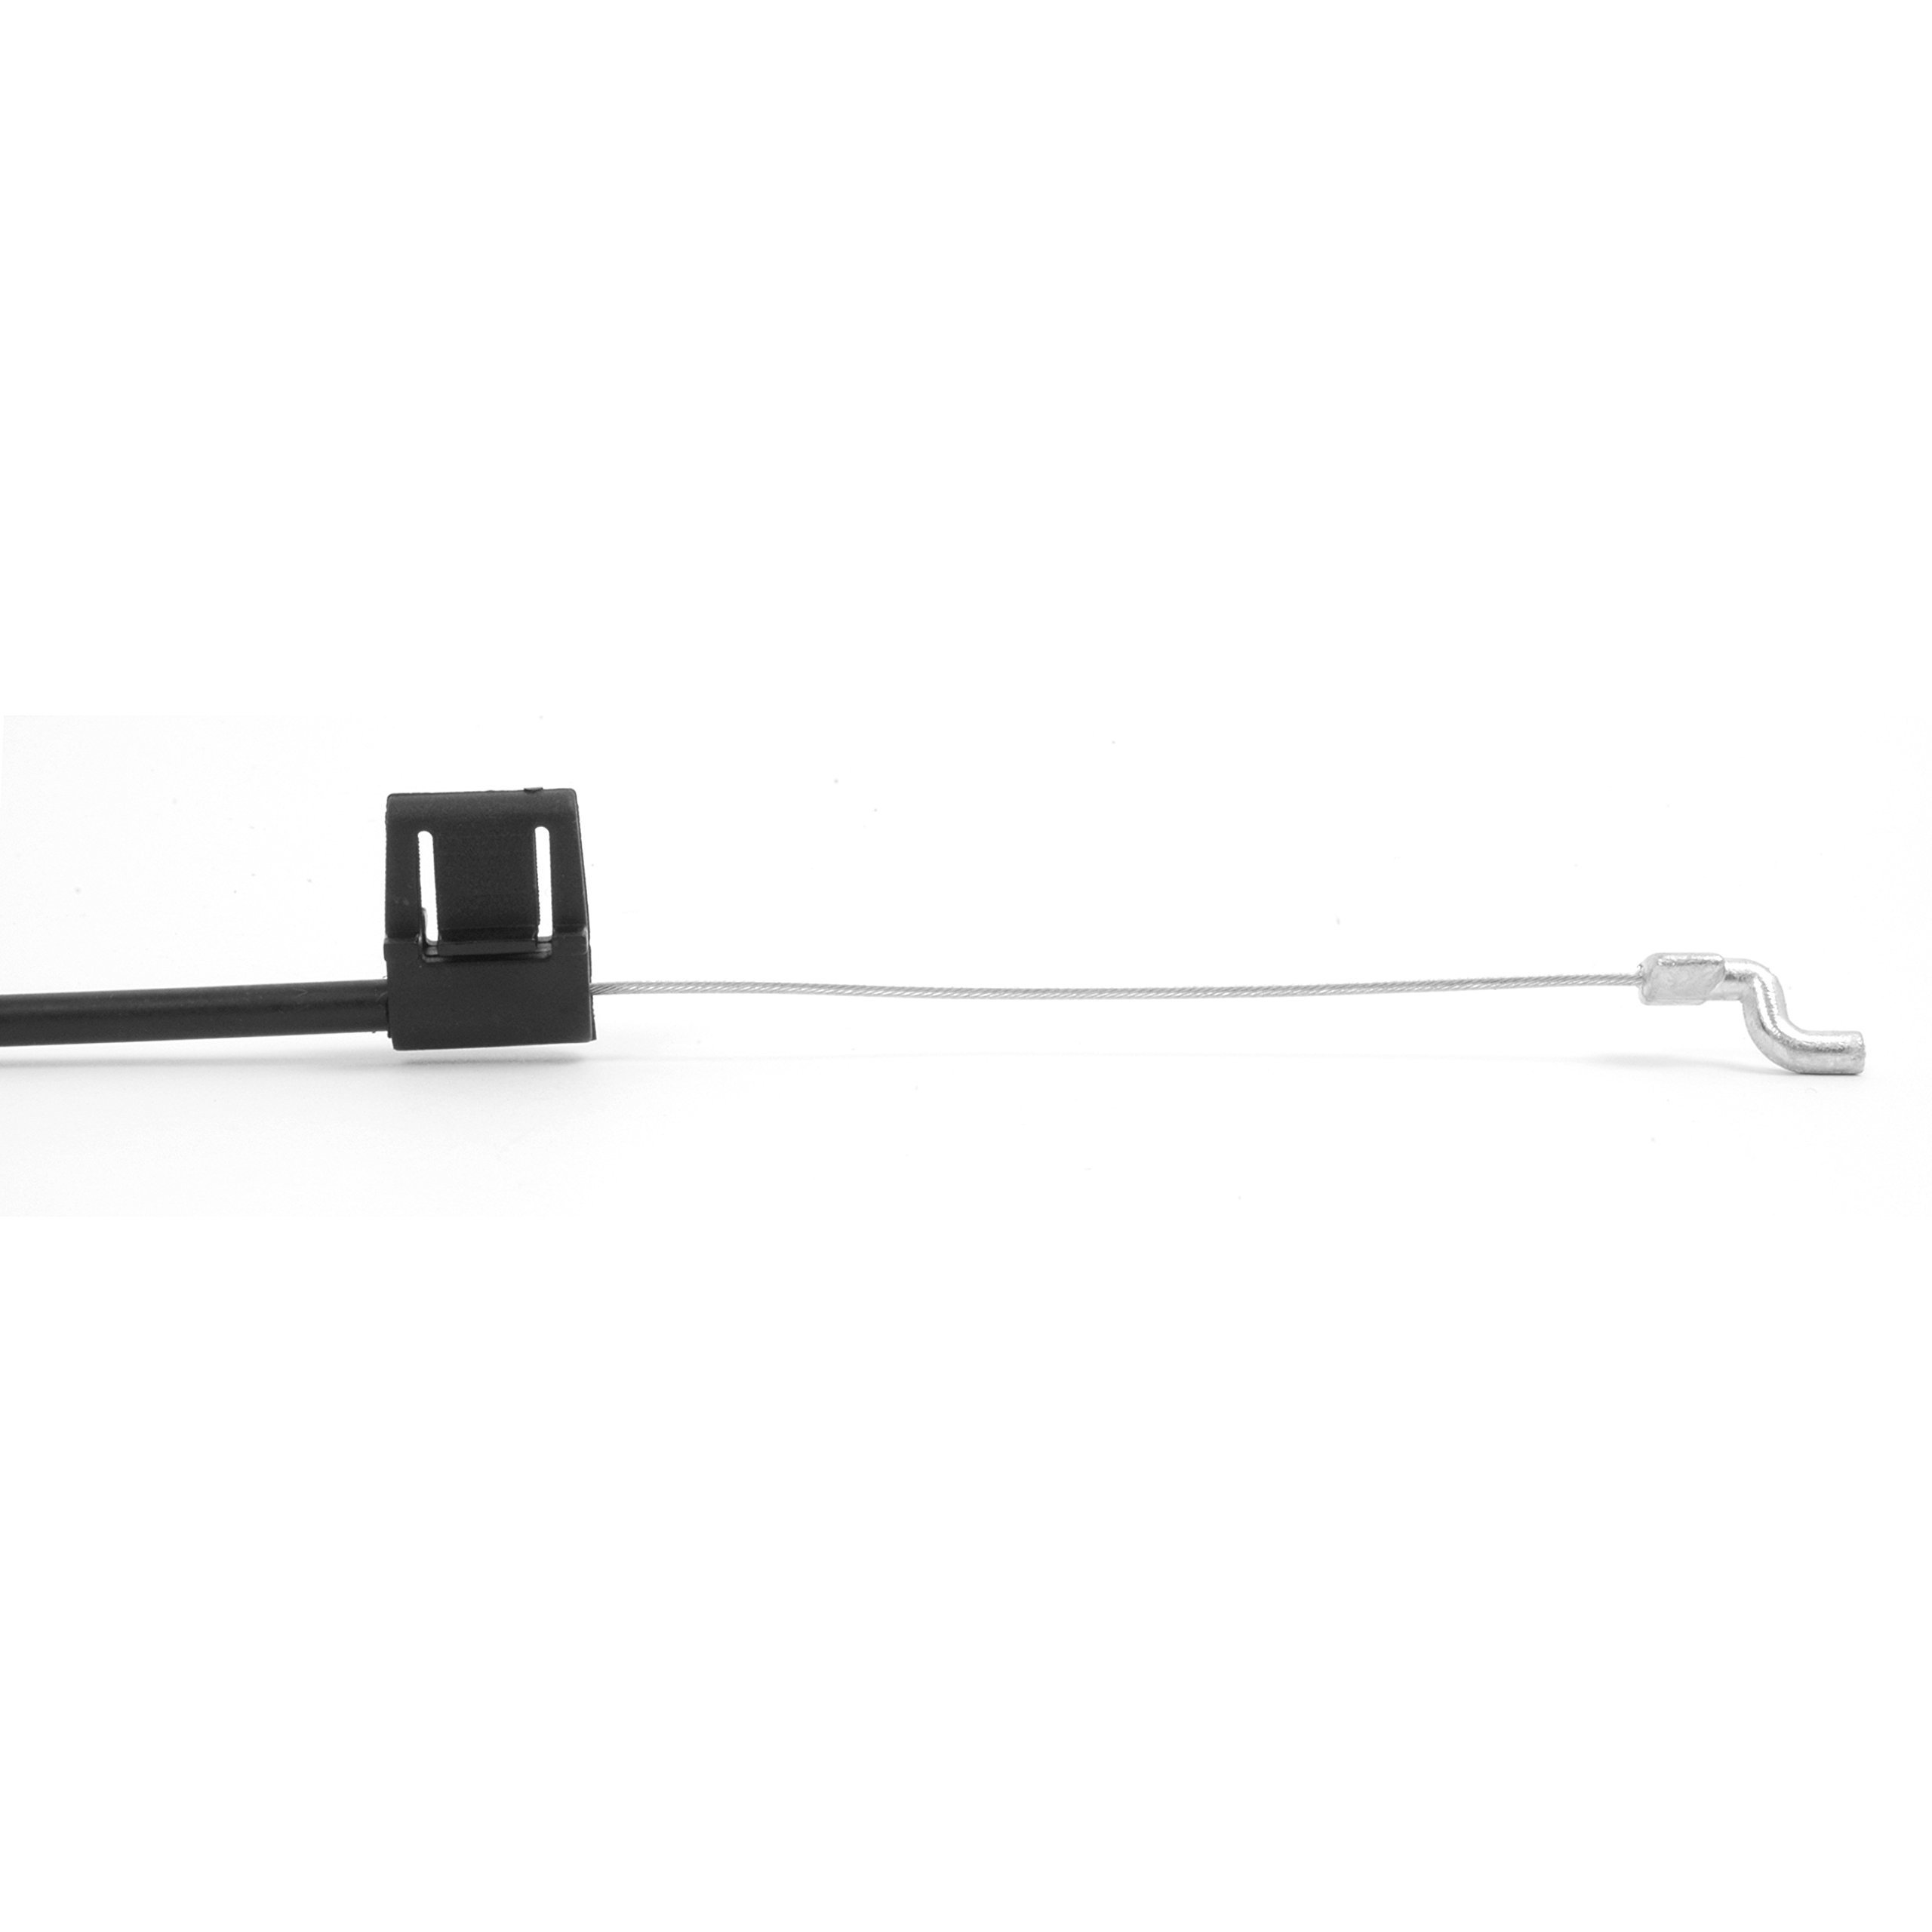 Recliner Parts: 40 1/2" Black D-Pull Cable Release